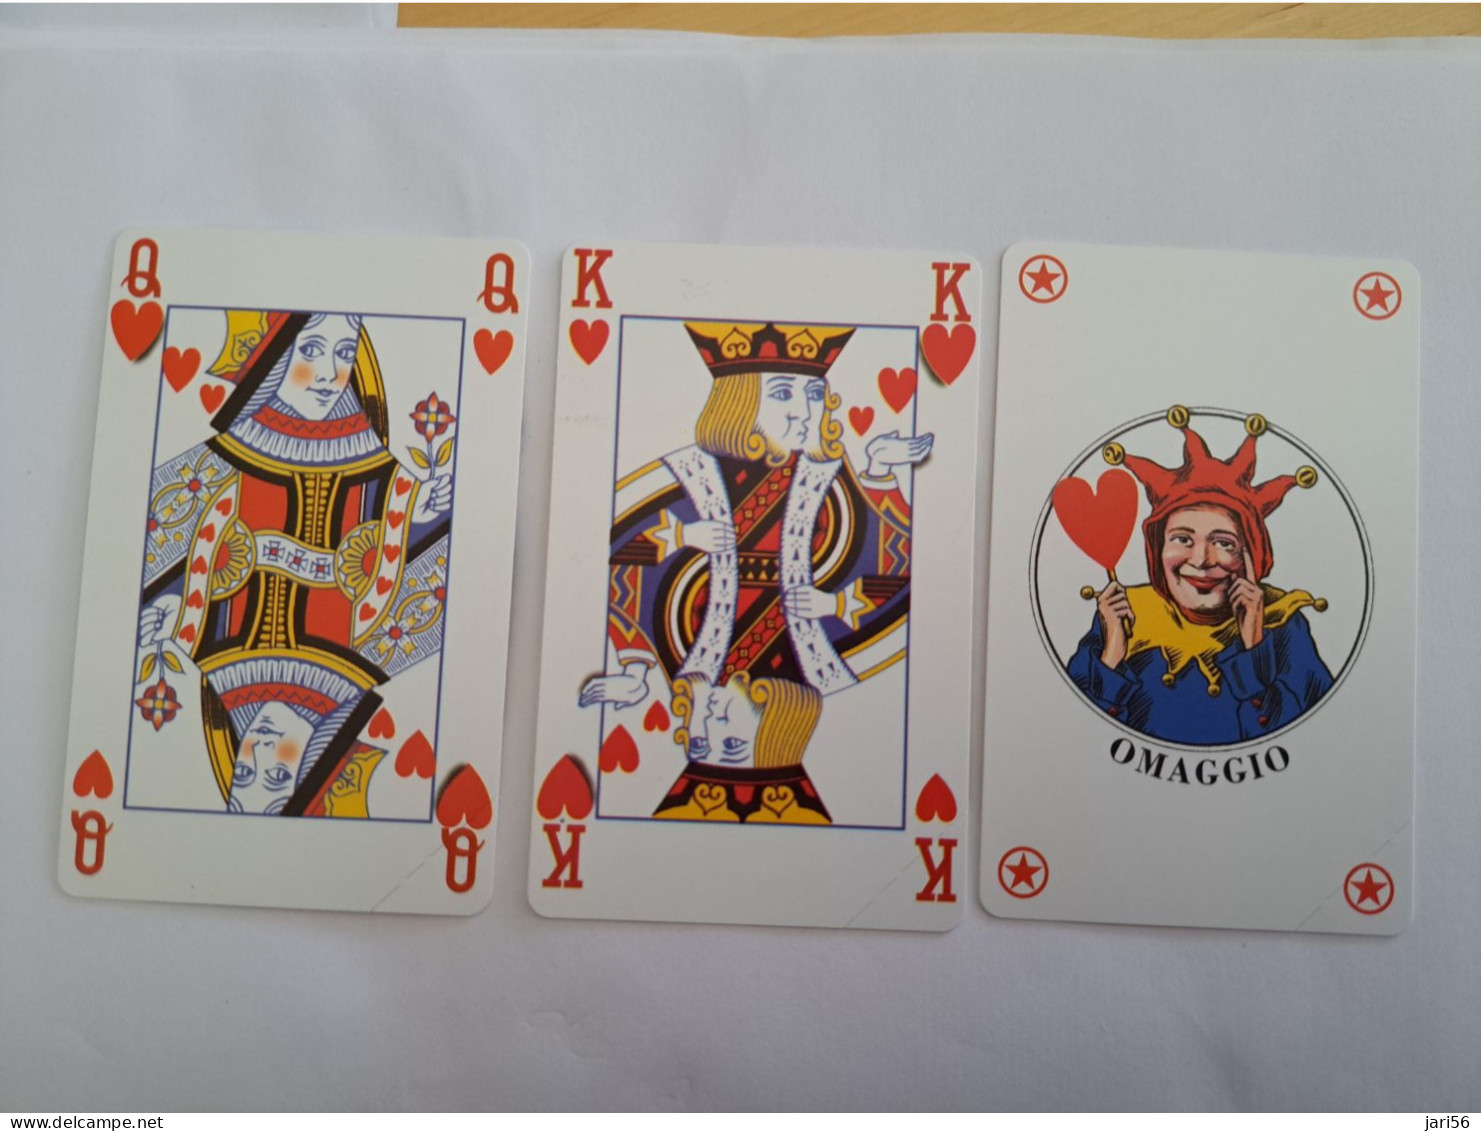 ITALIA LIRE 2000/ 10.000 X 2  /  PLAYING CARDS ON CARD/ KING/QUEEN/ JOKER / 3 CARDS    MINT  ** 13831 ** - Pubbliche Ordinarie